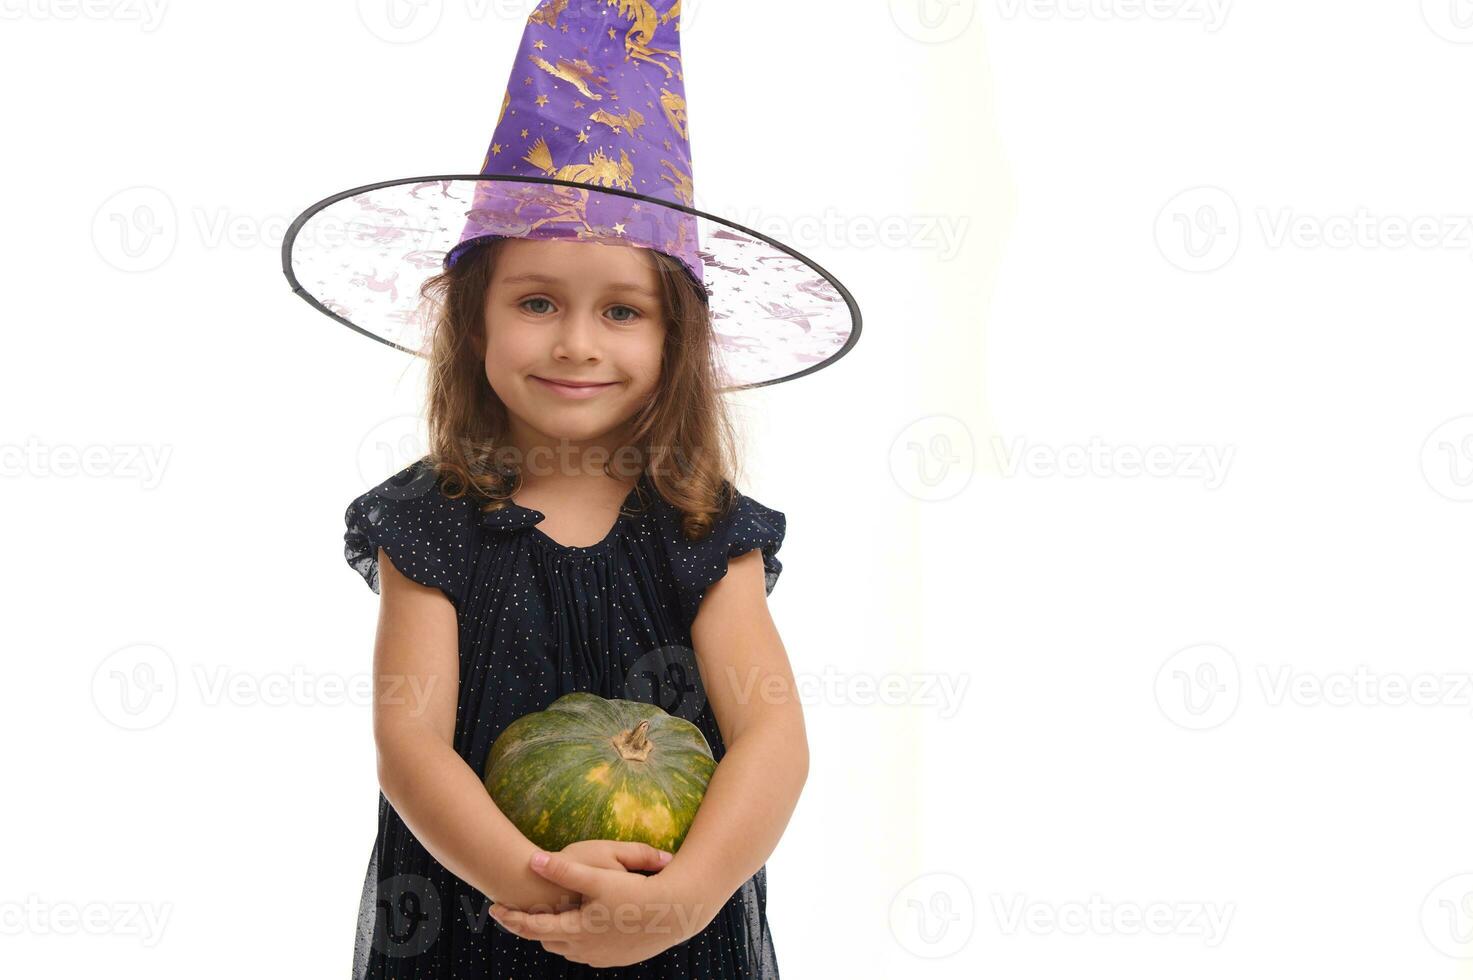 Halloween Witch concept - Portrait of little Caucasian girl dressed in stylish carnival attire and wizard hat, witch child smiles posing with pumpkin against a white background with copy space photo